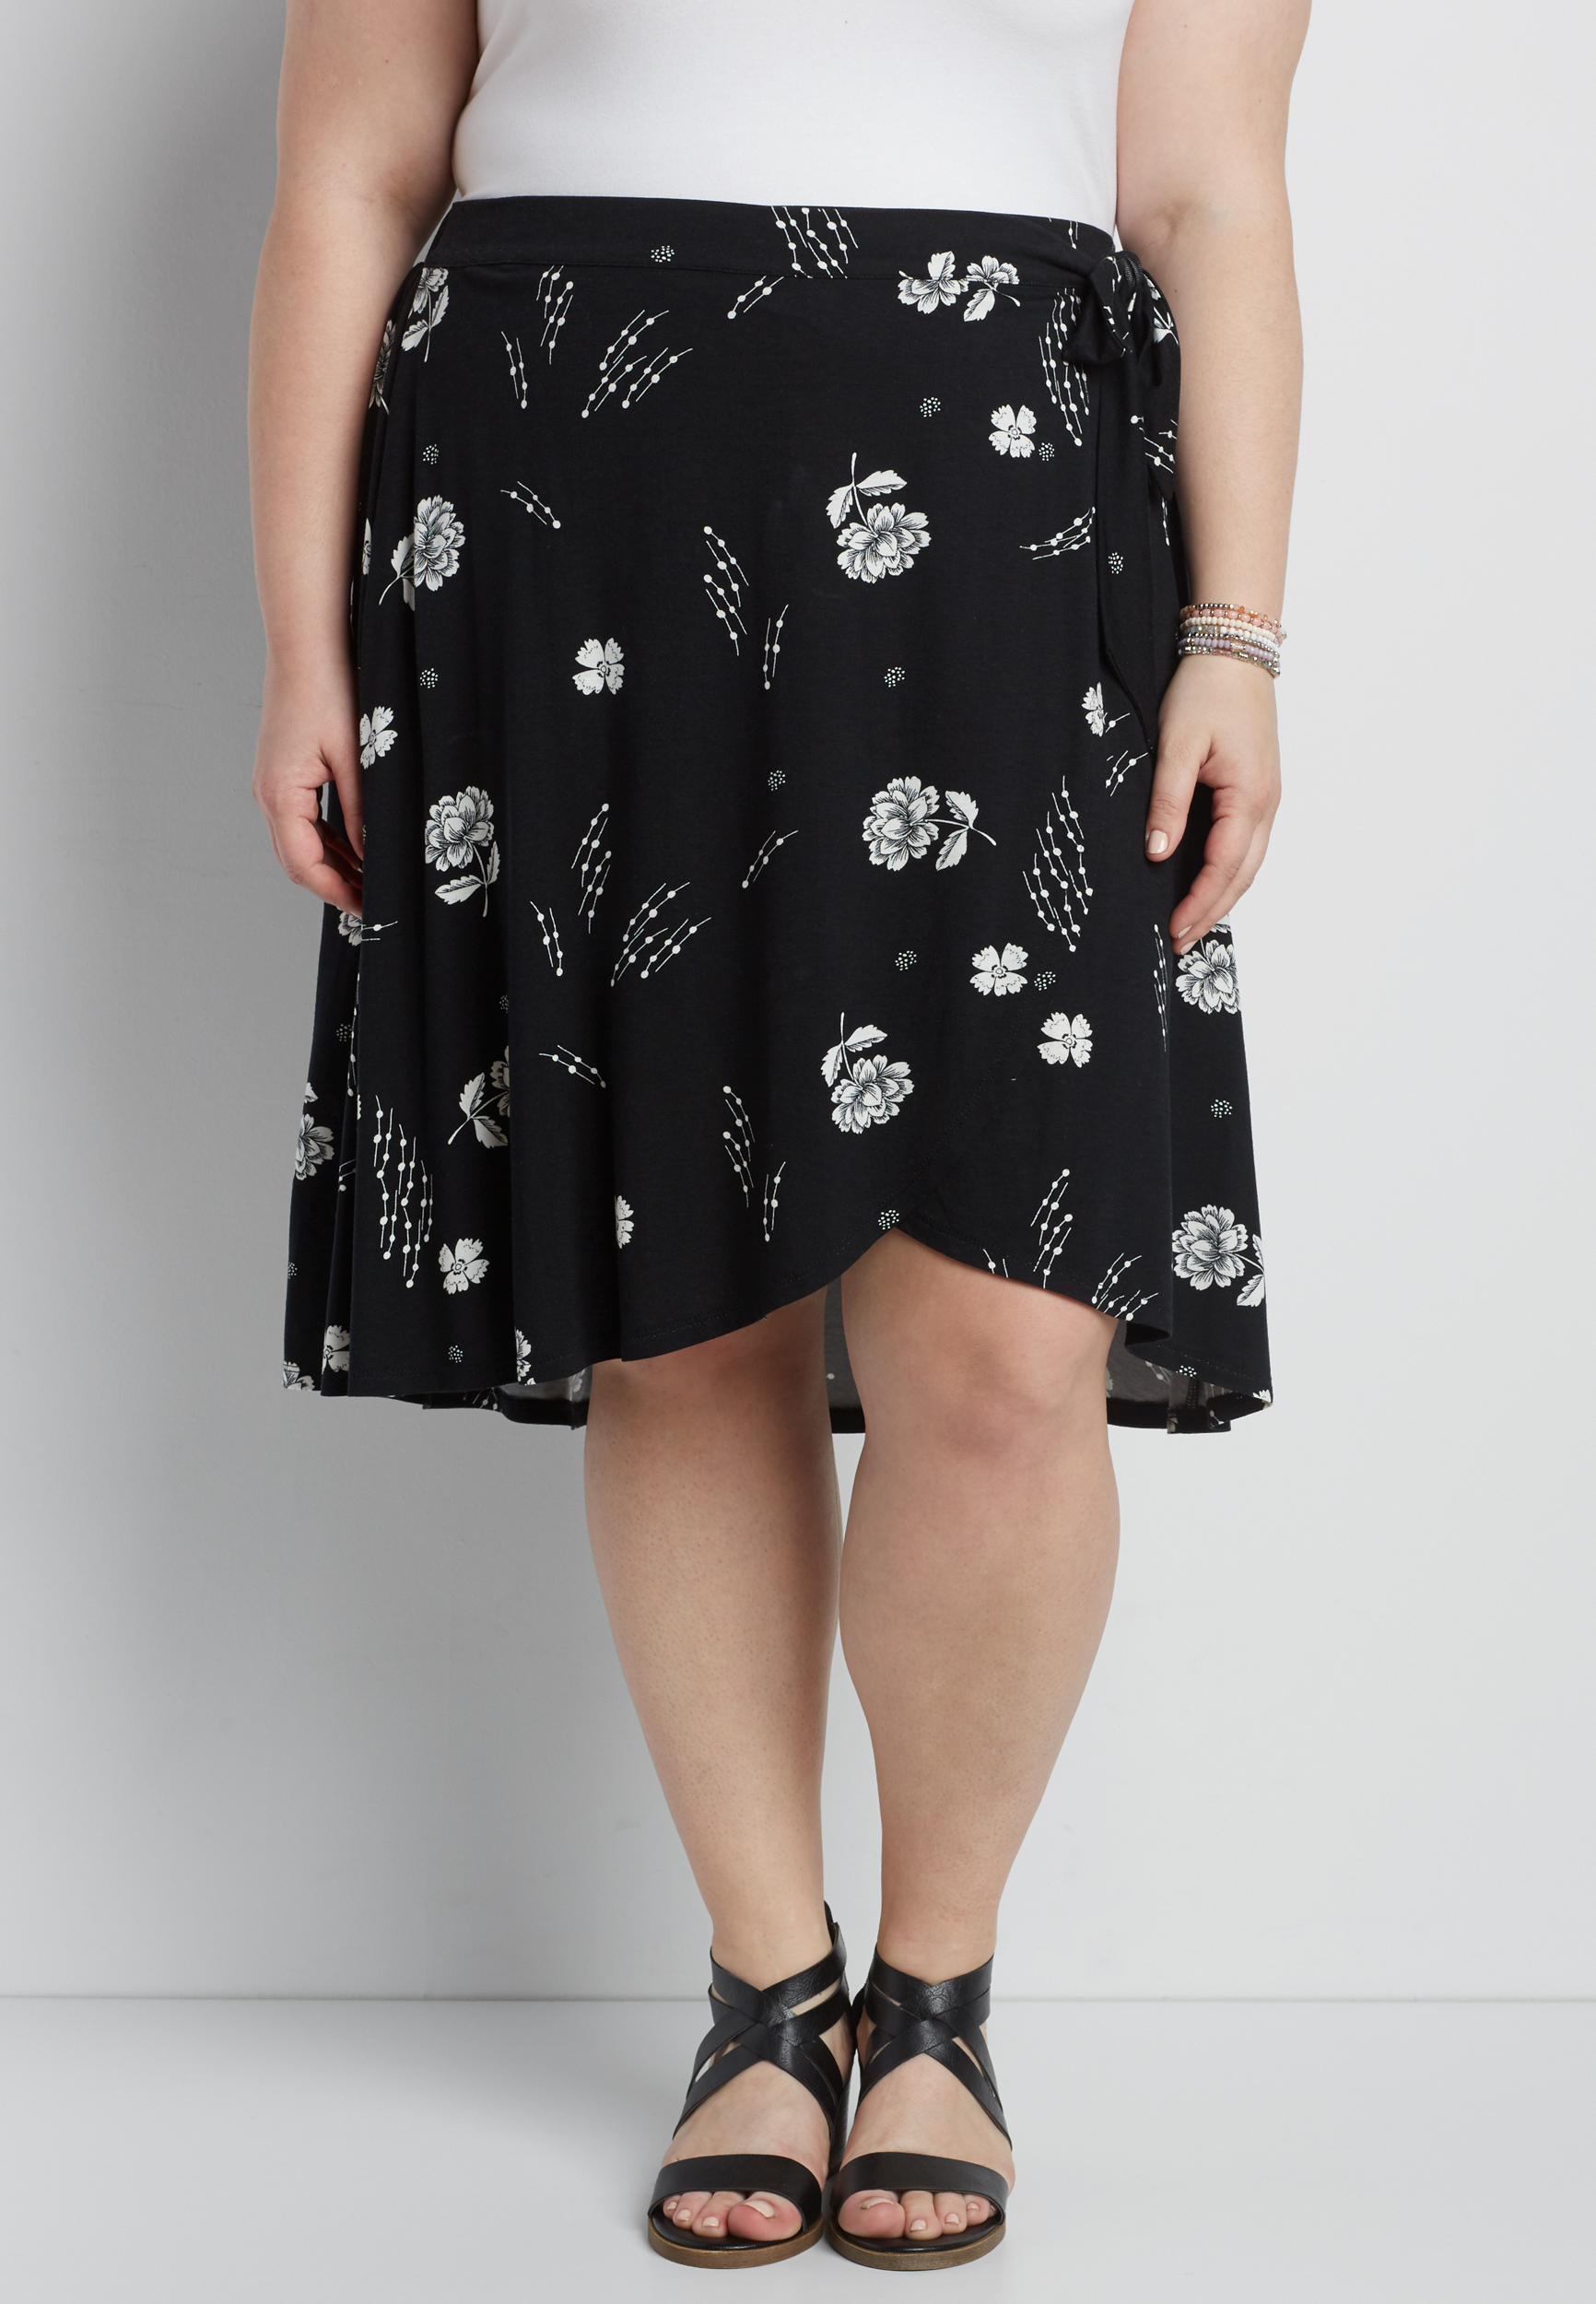 plus size skirt with side tie in floral print | maurices